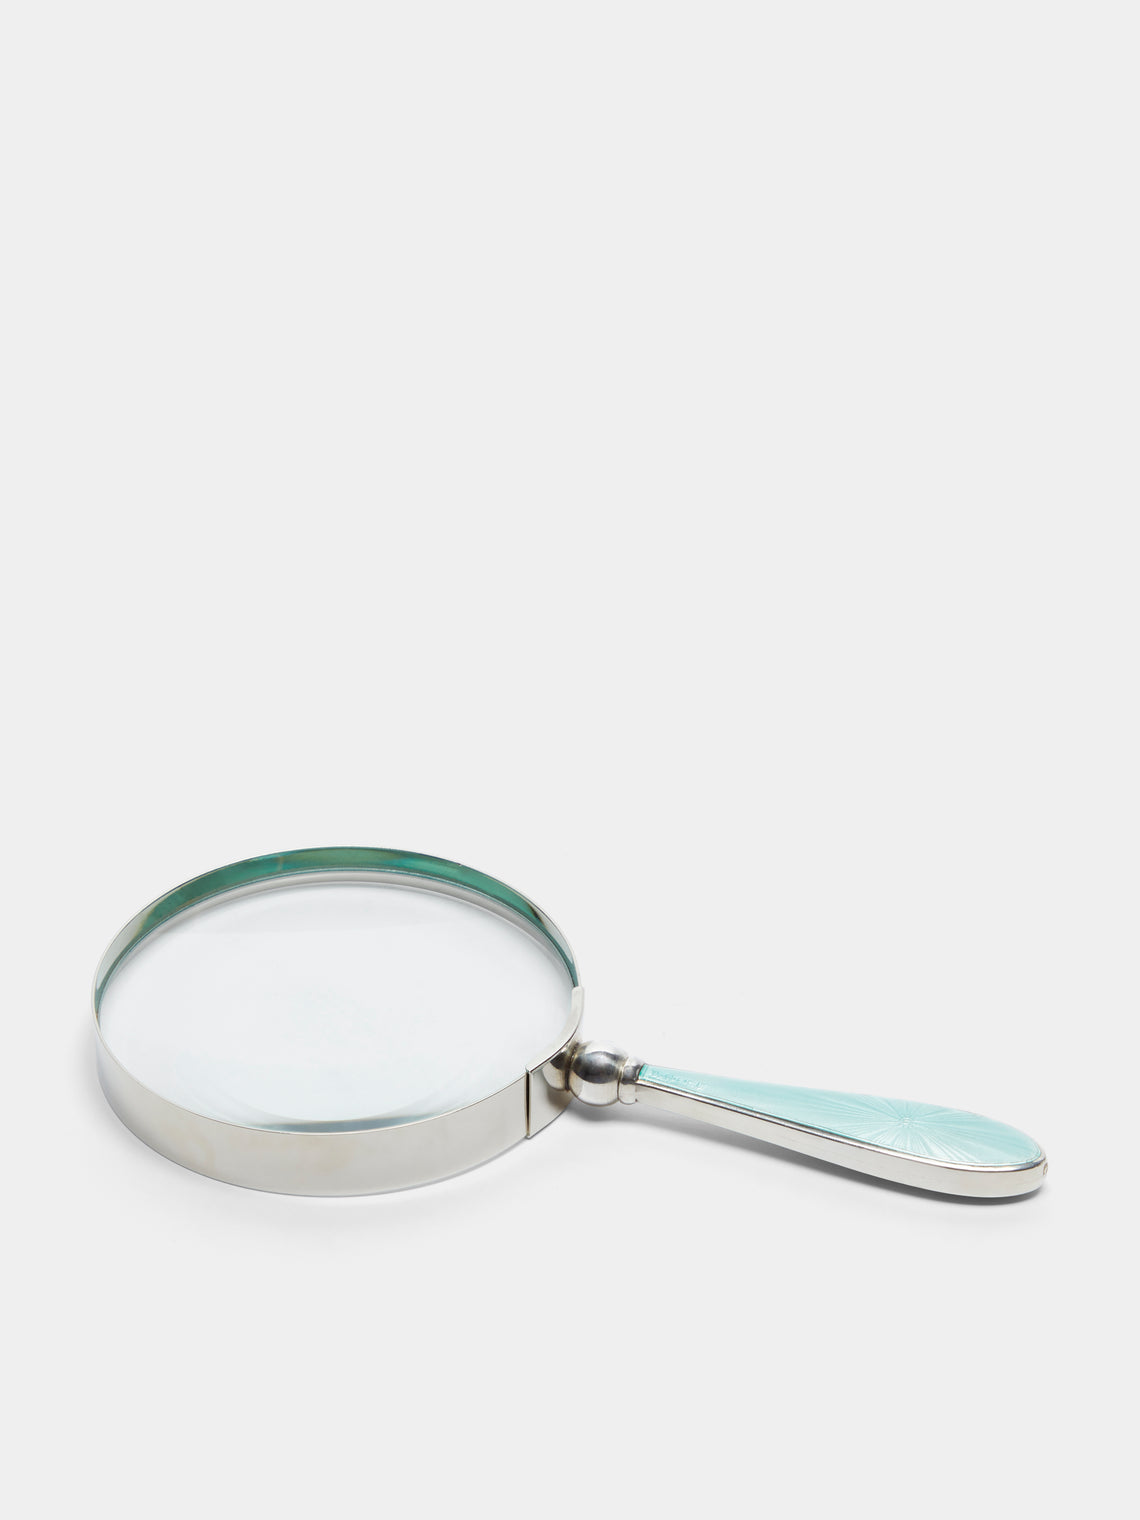 Antique and Vintage - 1920s Sterling Silver Enamel-Mounted Magnifying Glass - Blue - ABASK